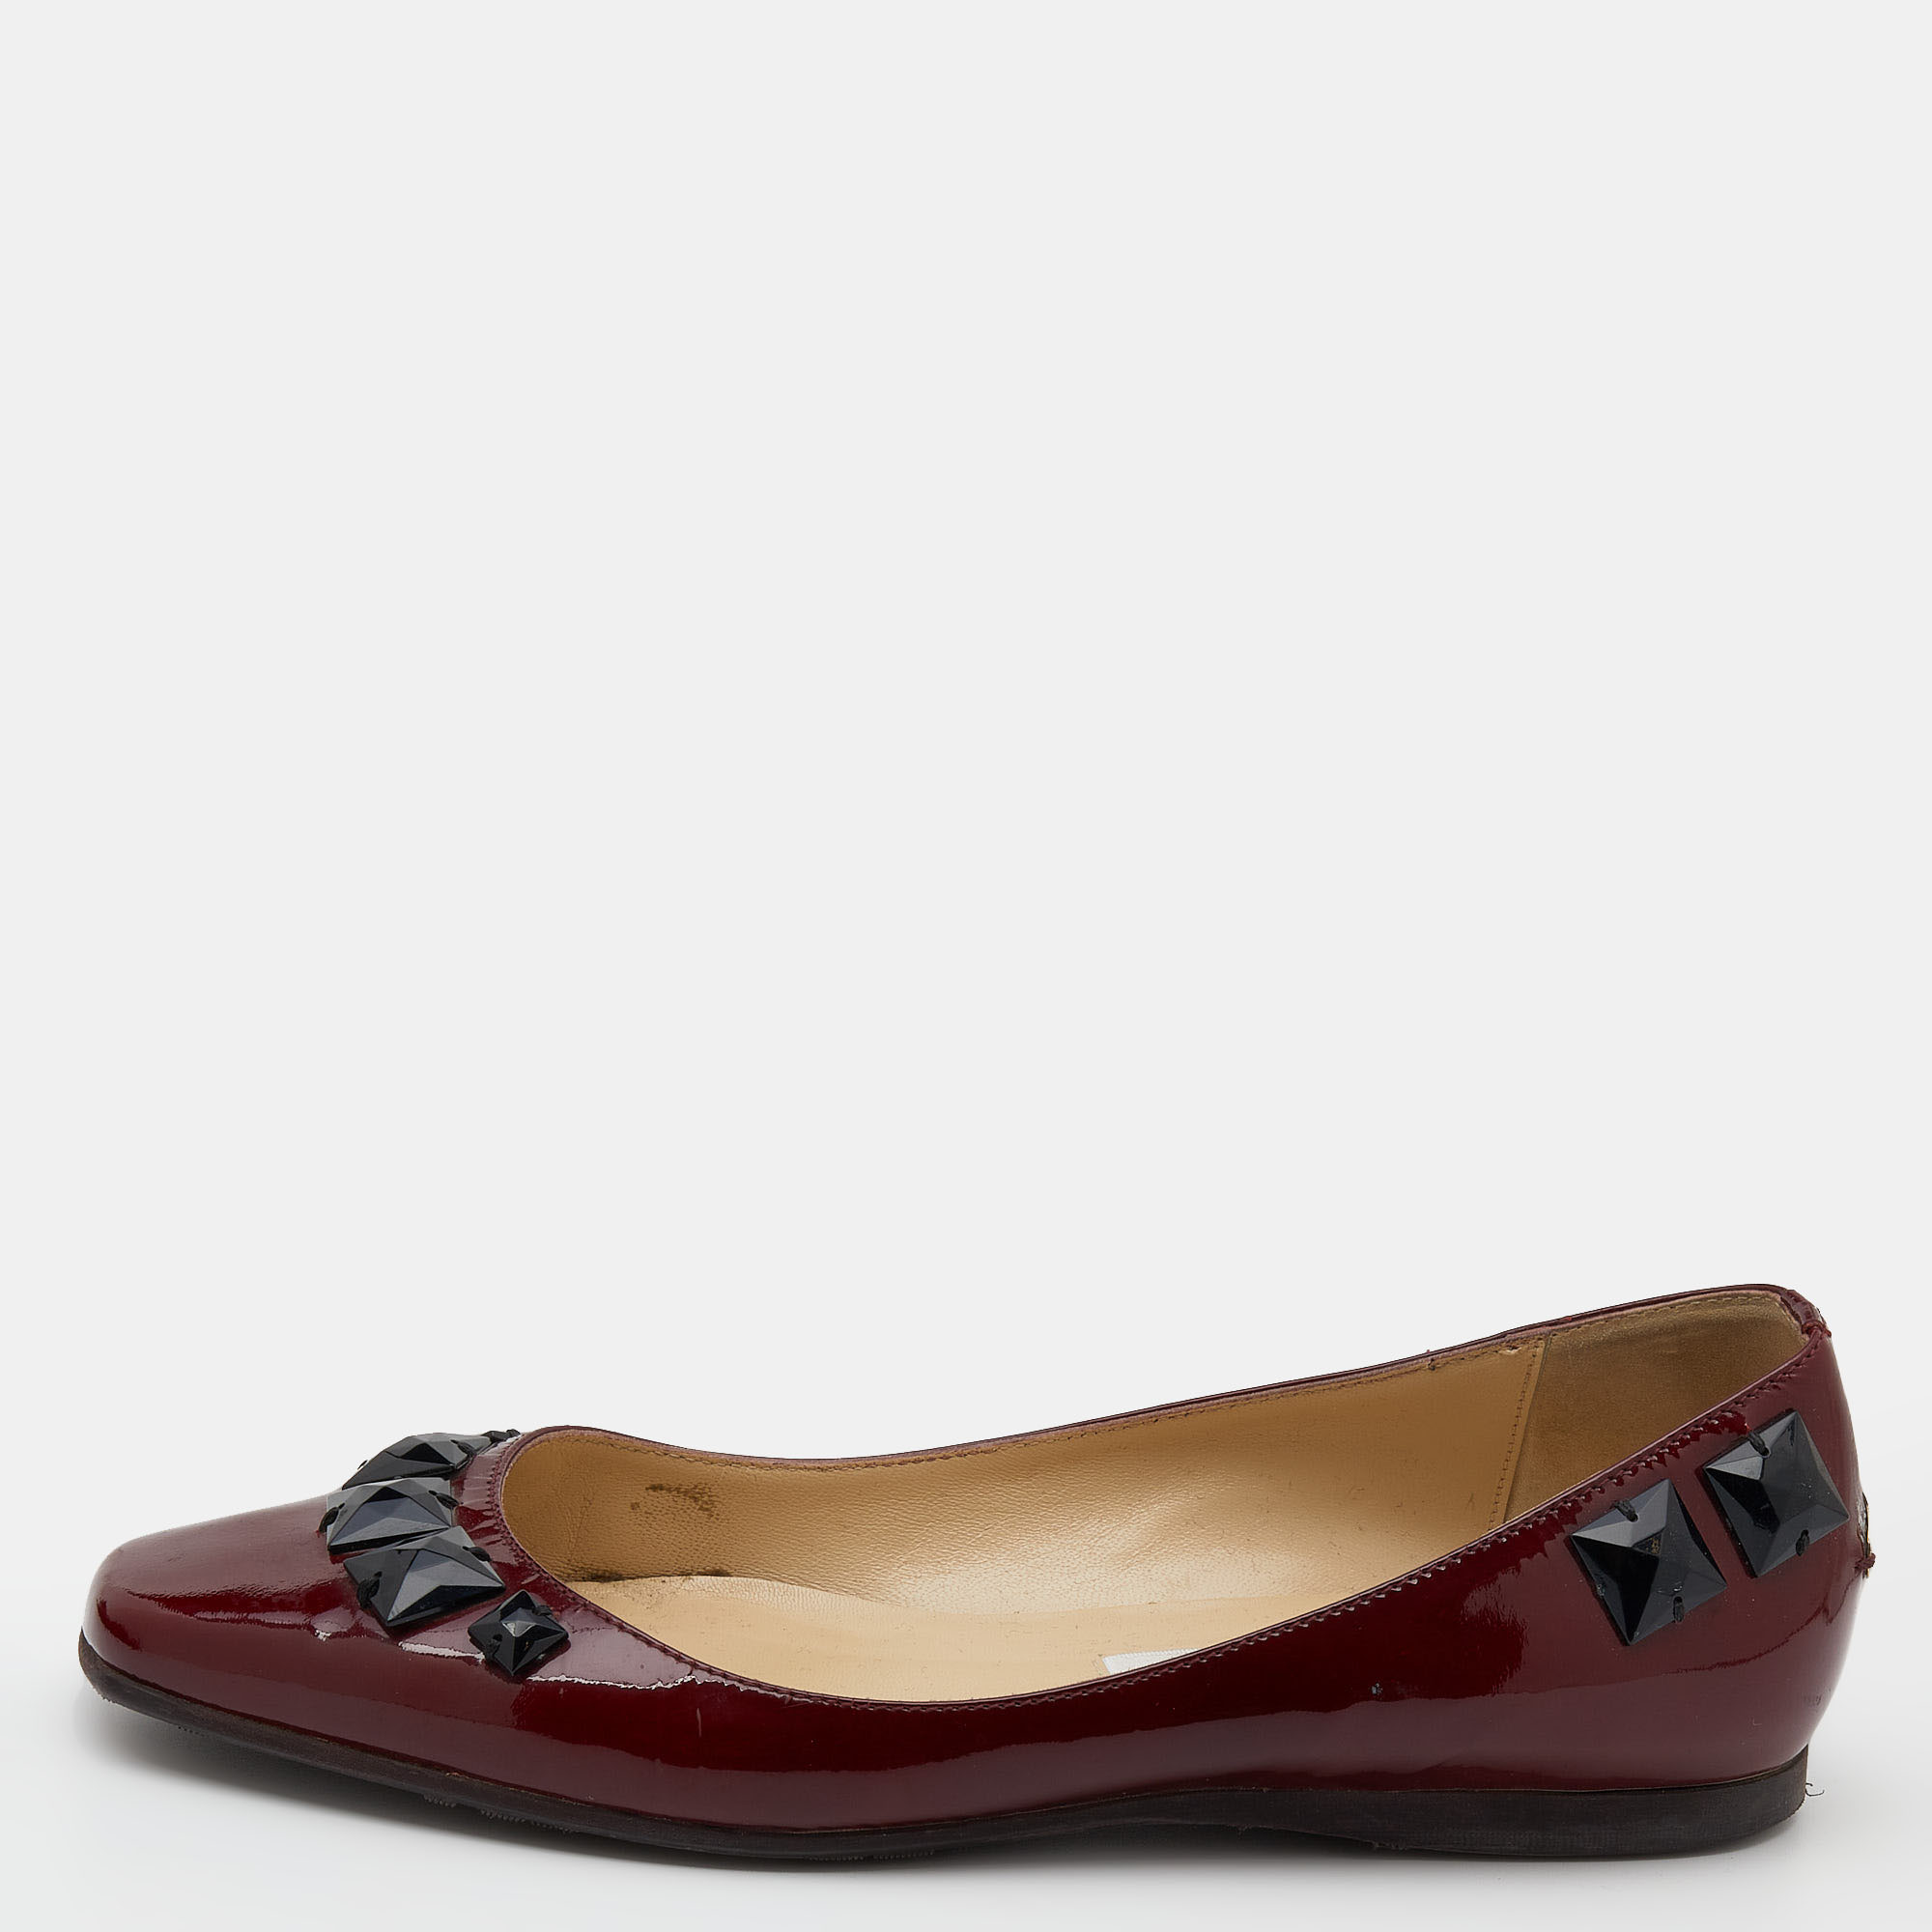 Pre-owned Jimmy Choo Burgundy Patent Leather Crystal Embellished Watson Ballet Flats Size 37.5